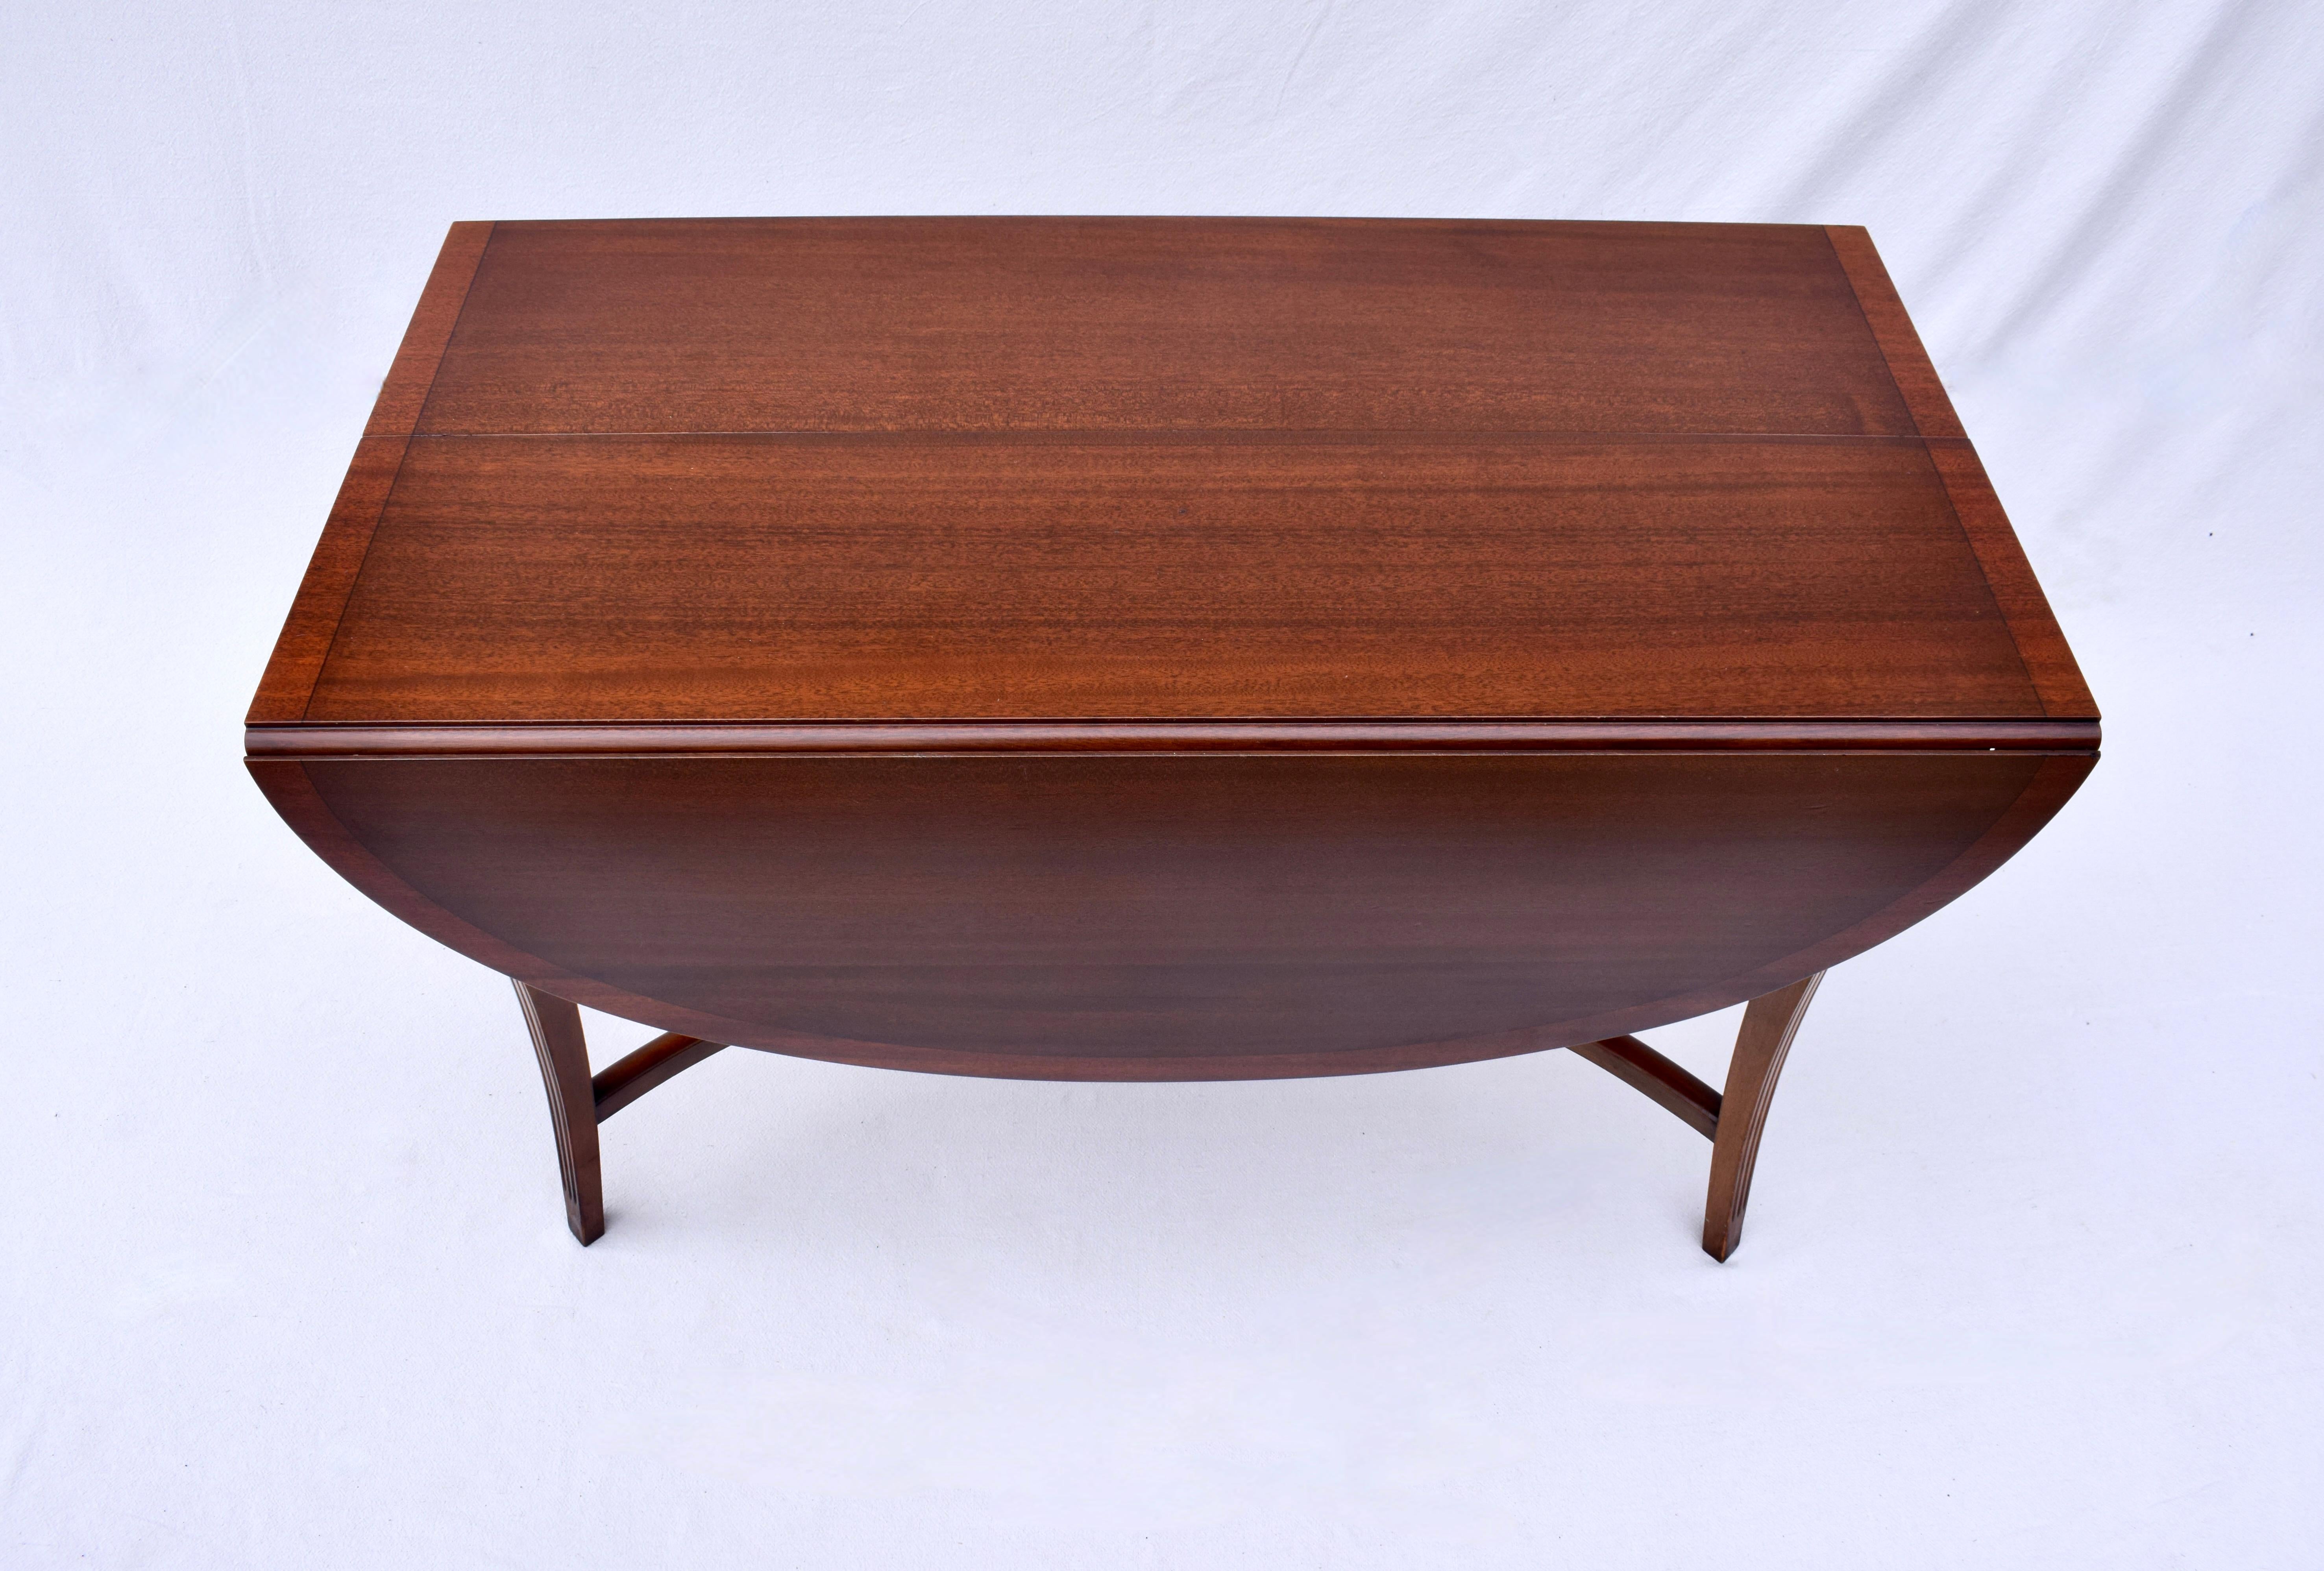 Elegant Charak Danbury drop leaf table featuring banded mahogany border with vibrant mahogany grains, Incised detail to the canted saber legs and exquisite X stretcher that mirrors the curves of the drop sides. Leaves extended, the top pivots 180